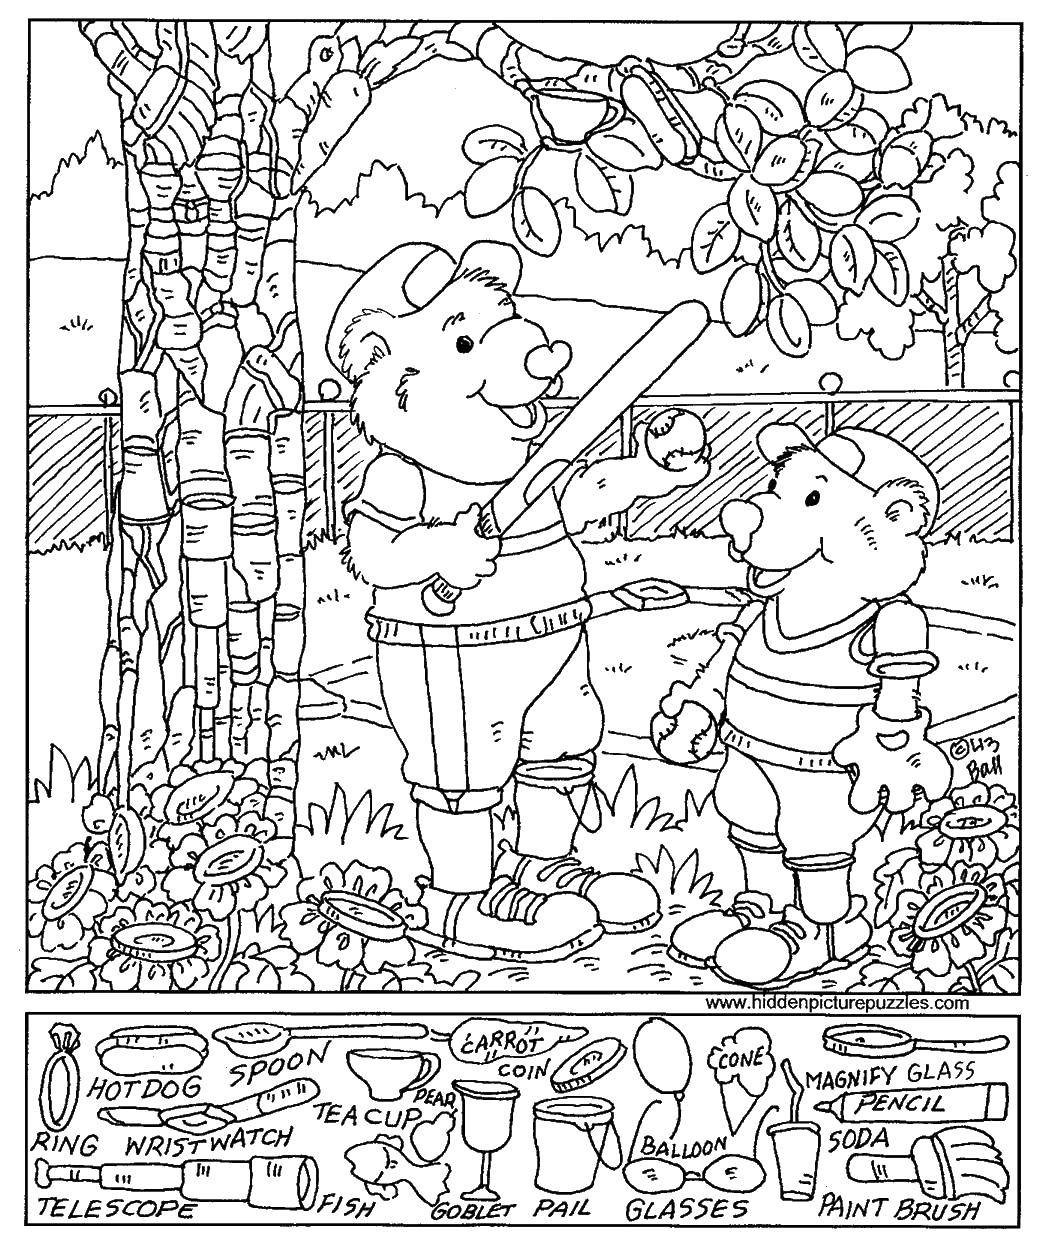 Coloring Two bears baseball. Category Find what is hidden. Tags:  find items, items, teddies.